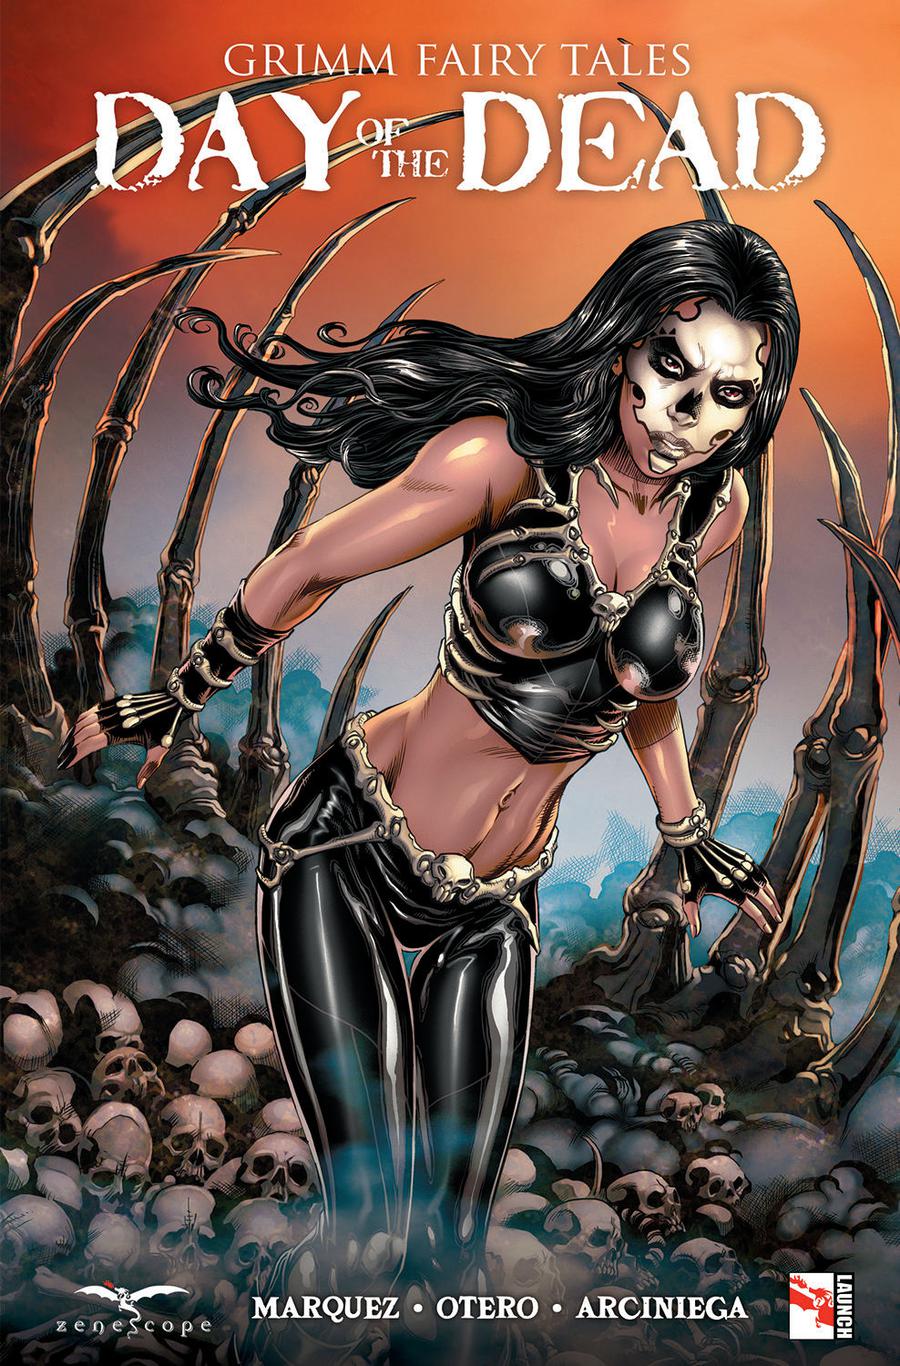 Grimm Fairy Tales Presents Day Of The Dead Vol 1 TP